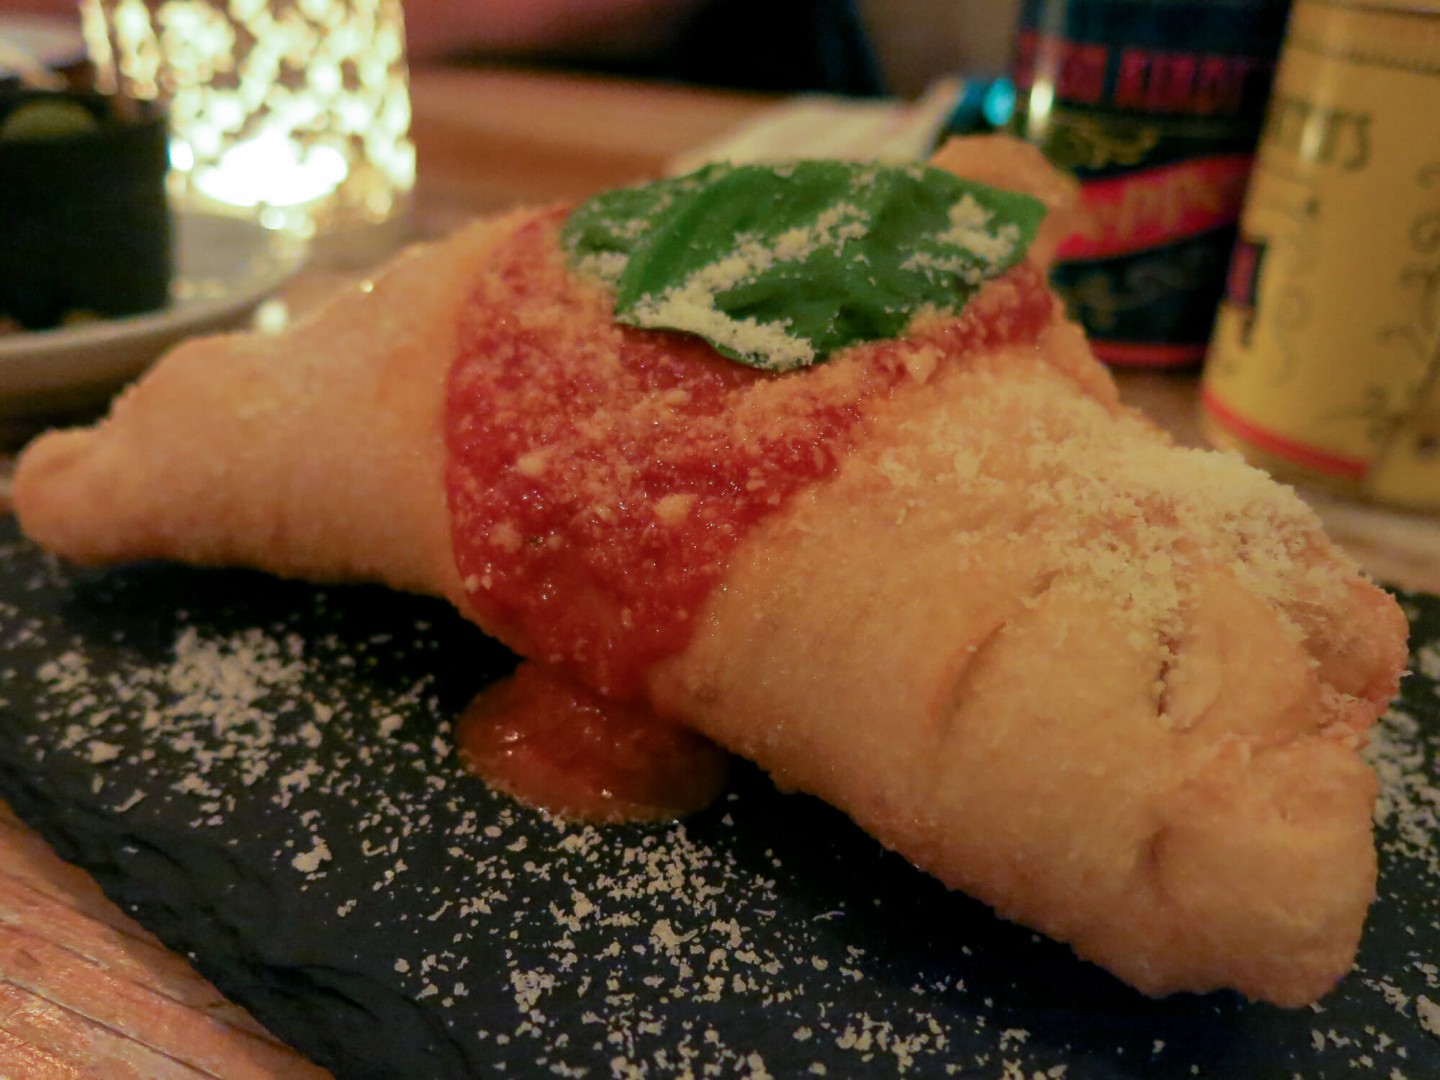 The deep fried mini pizza at Meridionale in Fulham, London. Great local Italian restaurant for pizza and pasta!